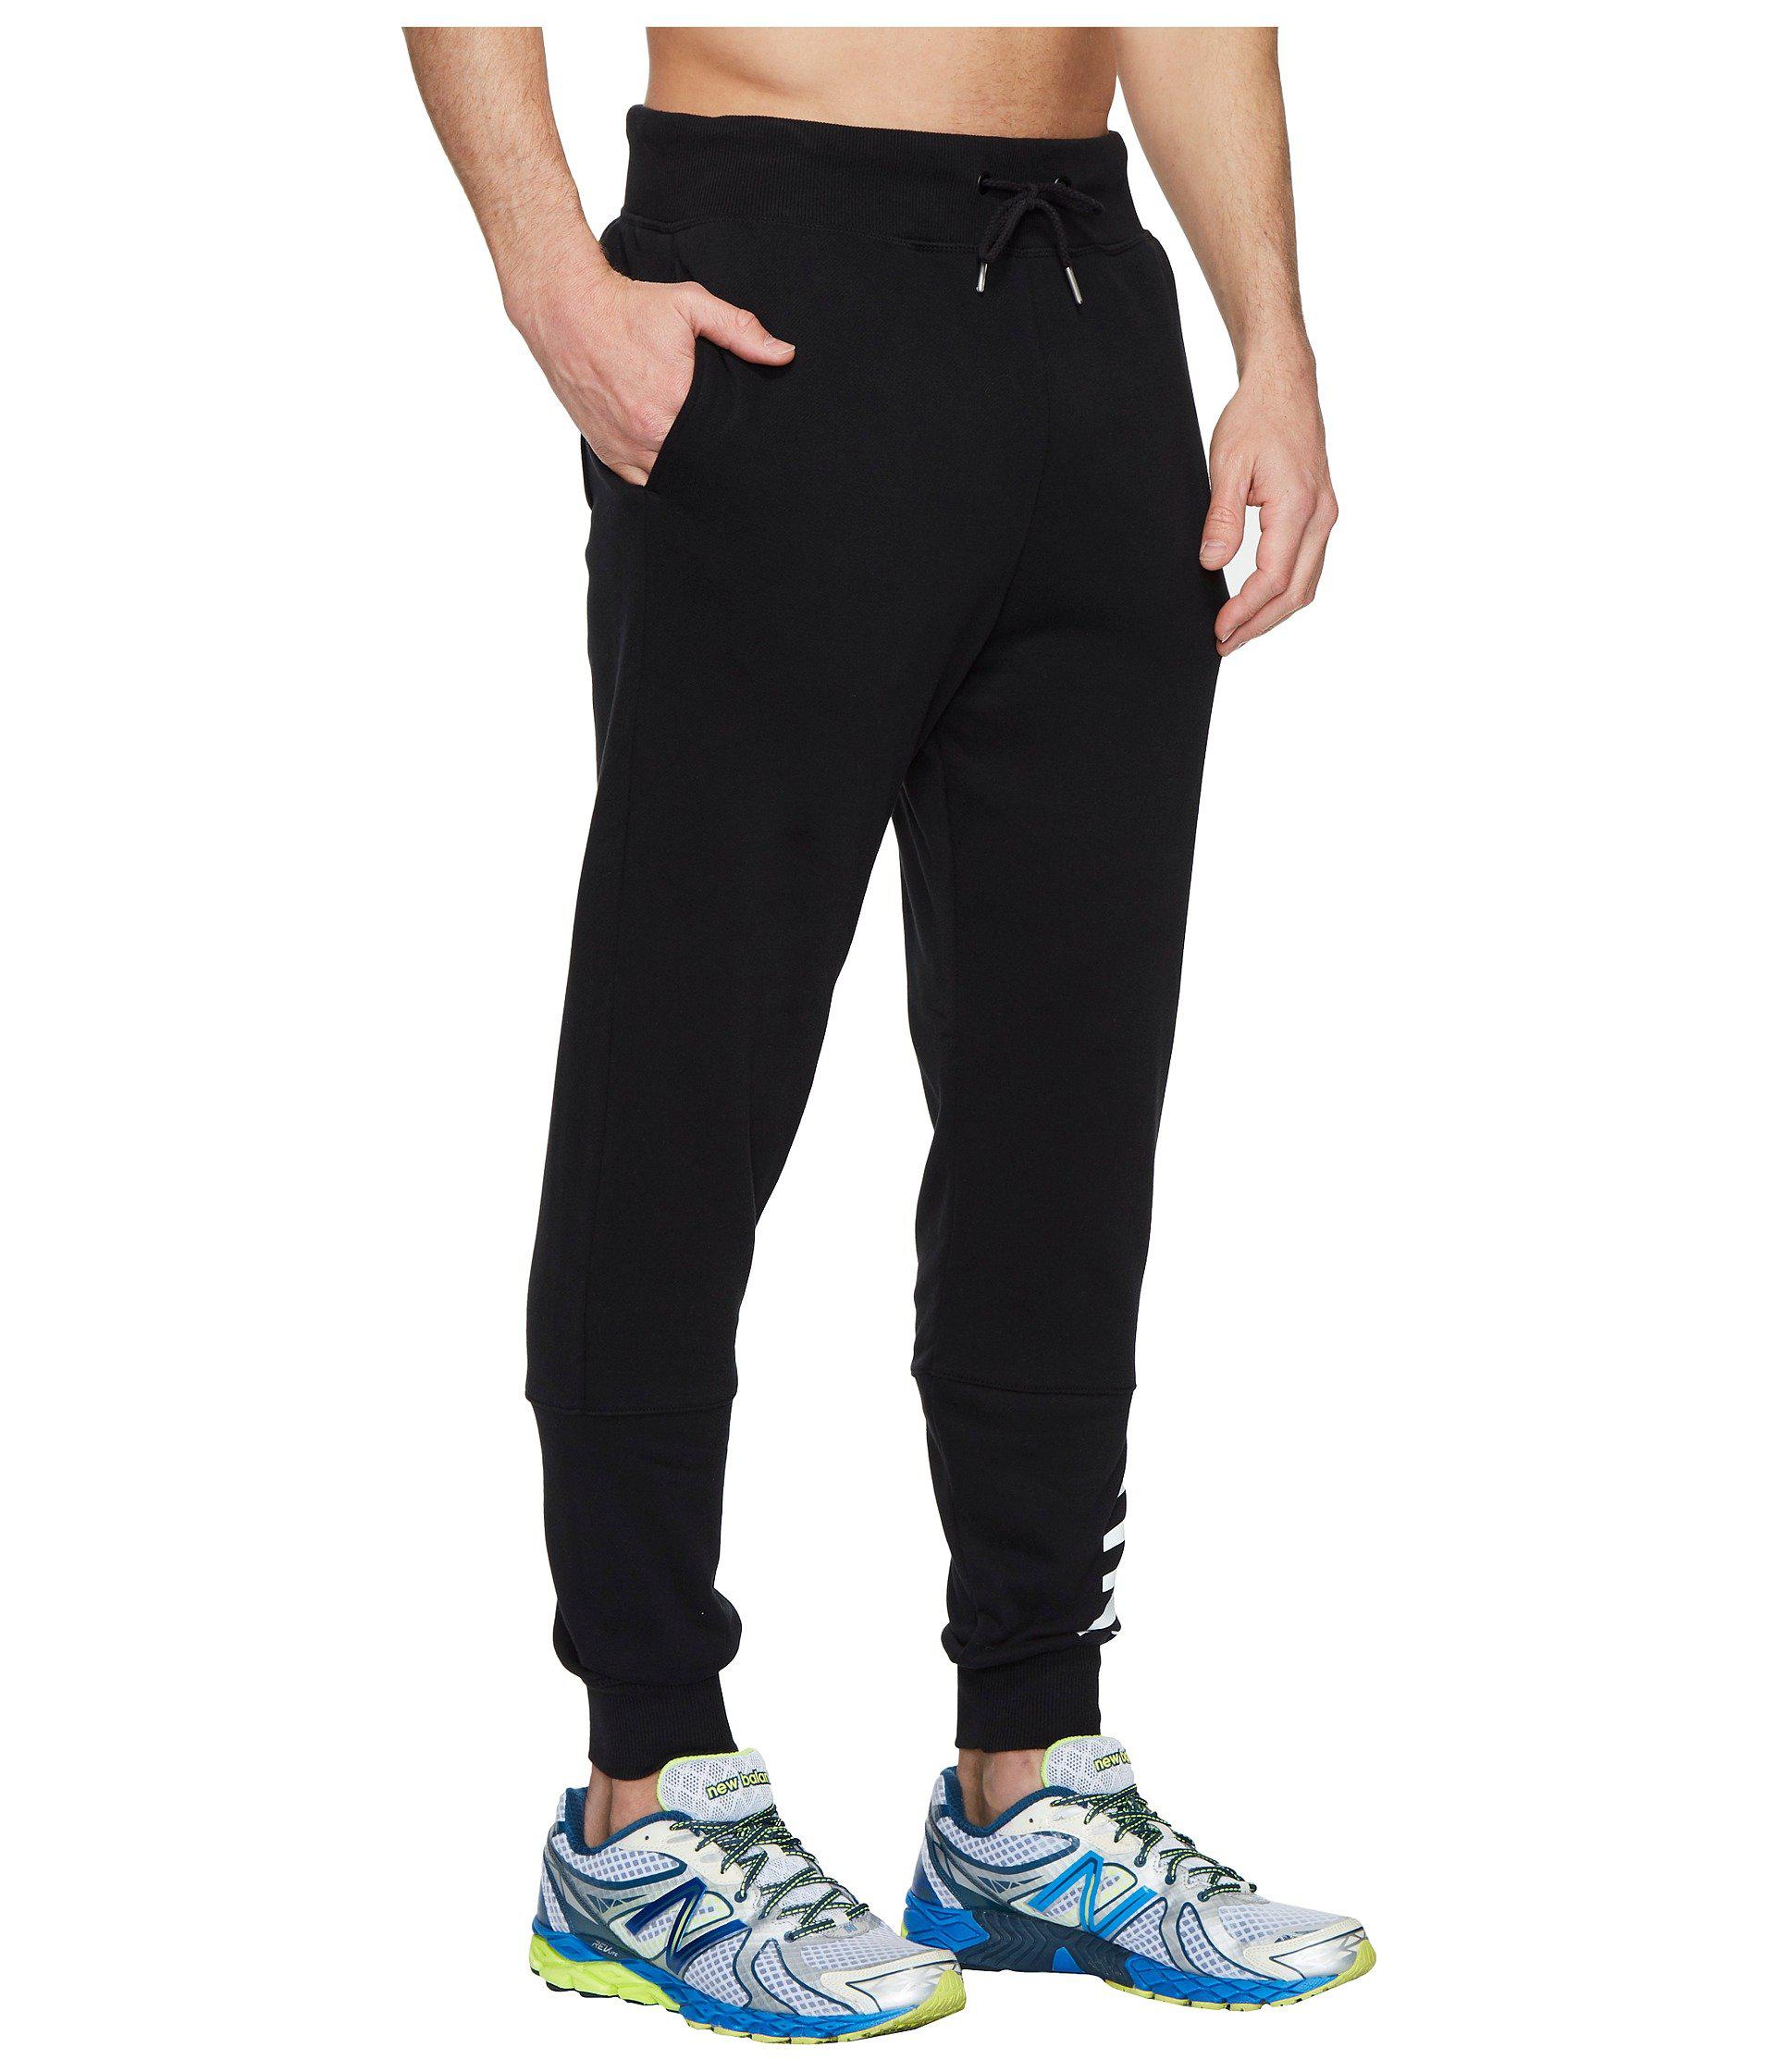 New Balance Cotton Essentials Ft Graphic Sweatpants in Black for Men - Lyst